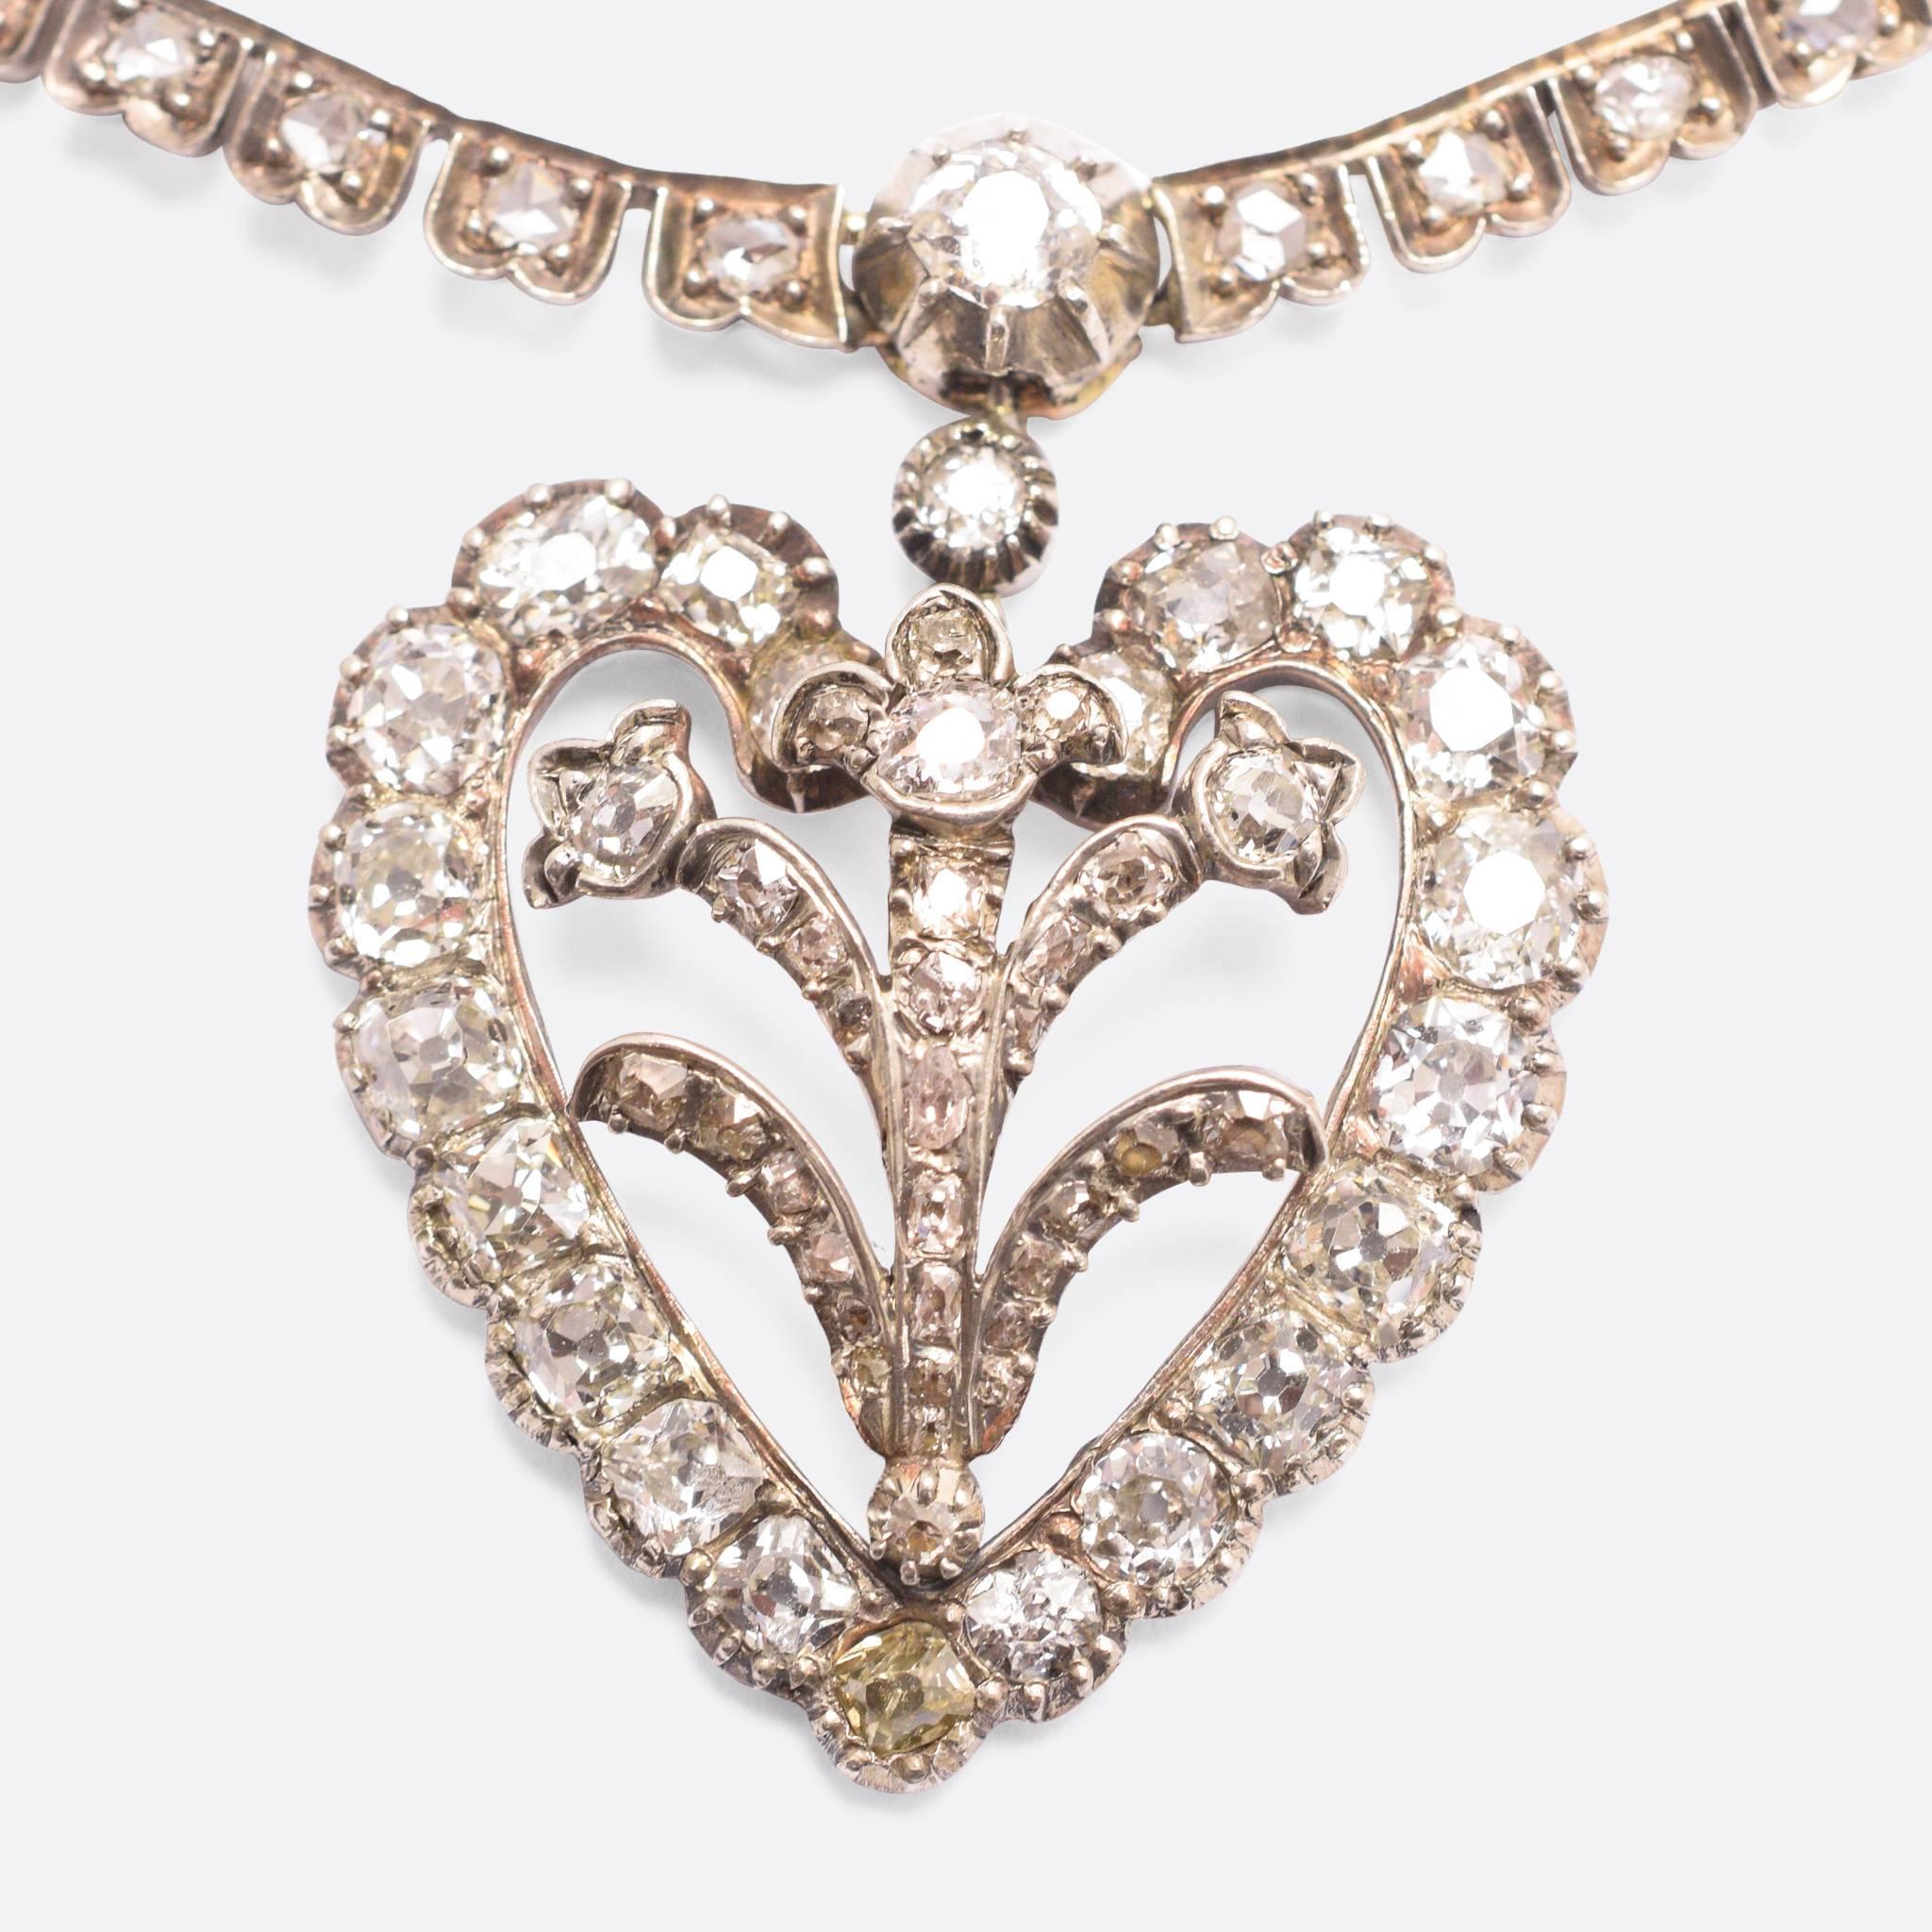 An exceptional antique diamond necklace, with five graduated heart drops. Set with over 30 carats of sparkling old mine cut and rose cut diamonds, the piece is nothing short of spectacular. A true Victorian statement necklace.

STONES
Old Mine Cut